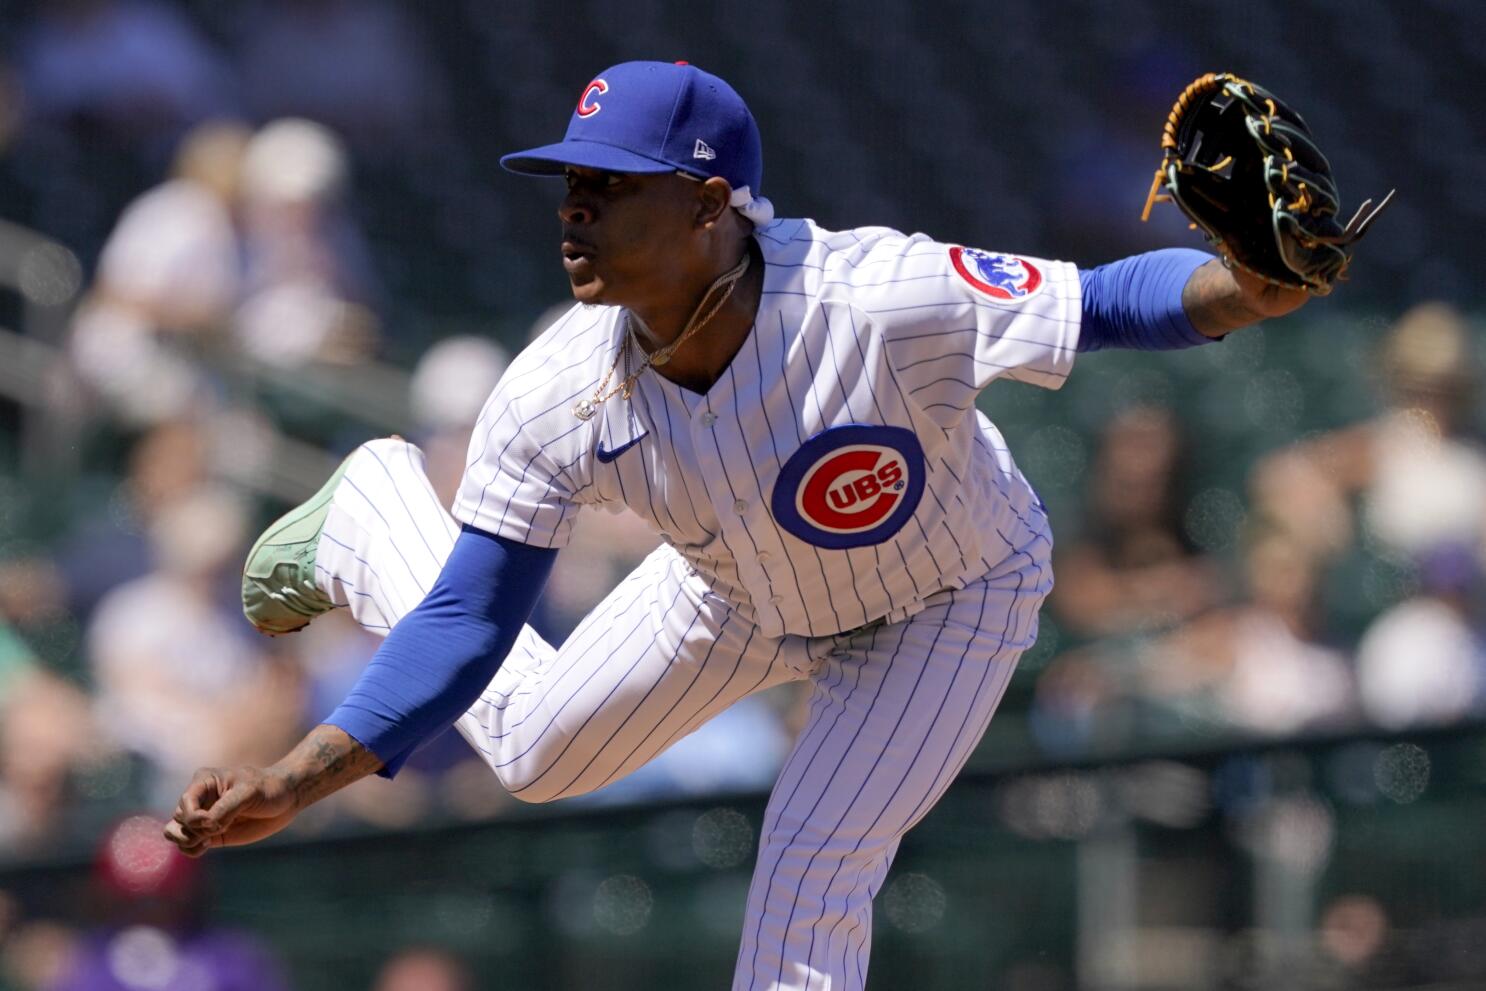 Iowa Cubs - Like the Chicago Cubs' jerseys? Well good news we have